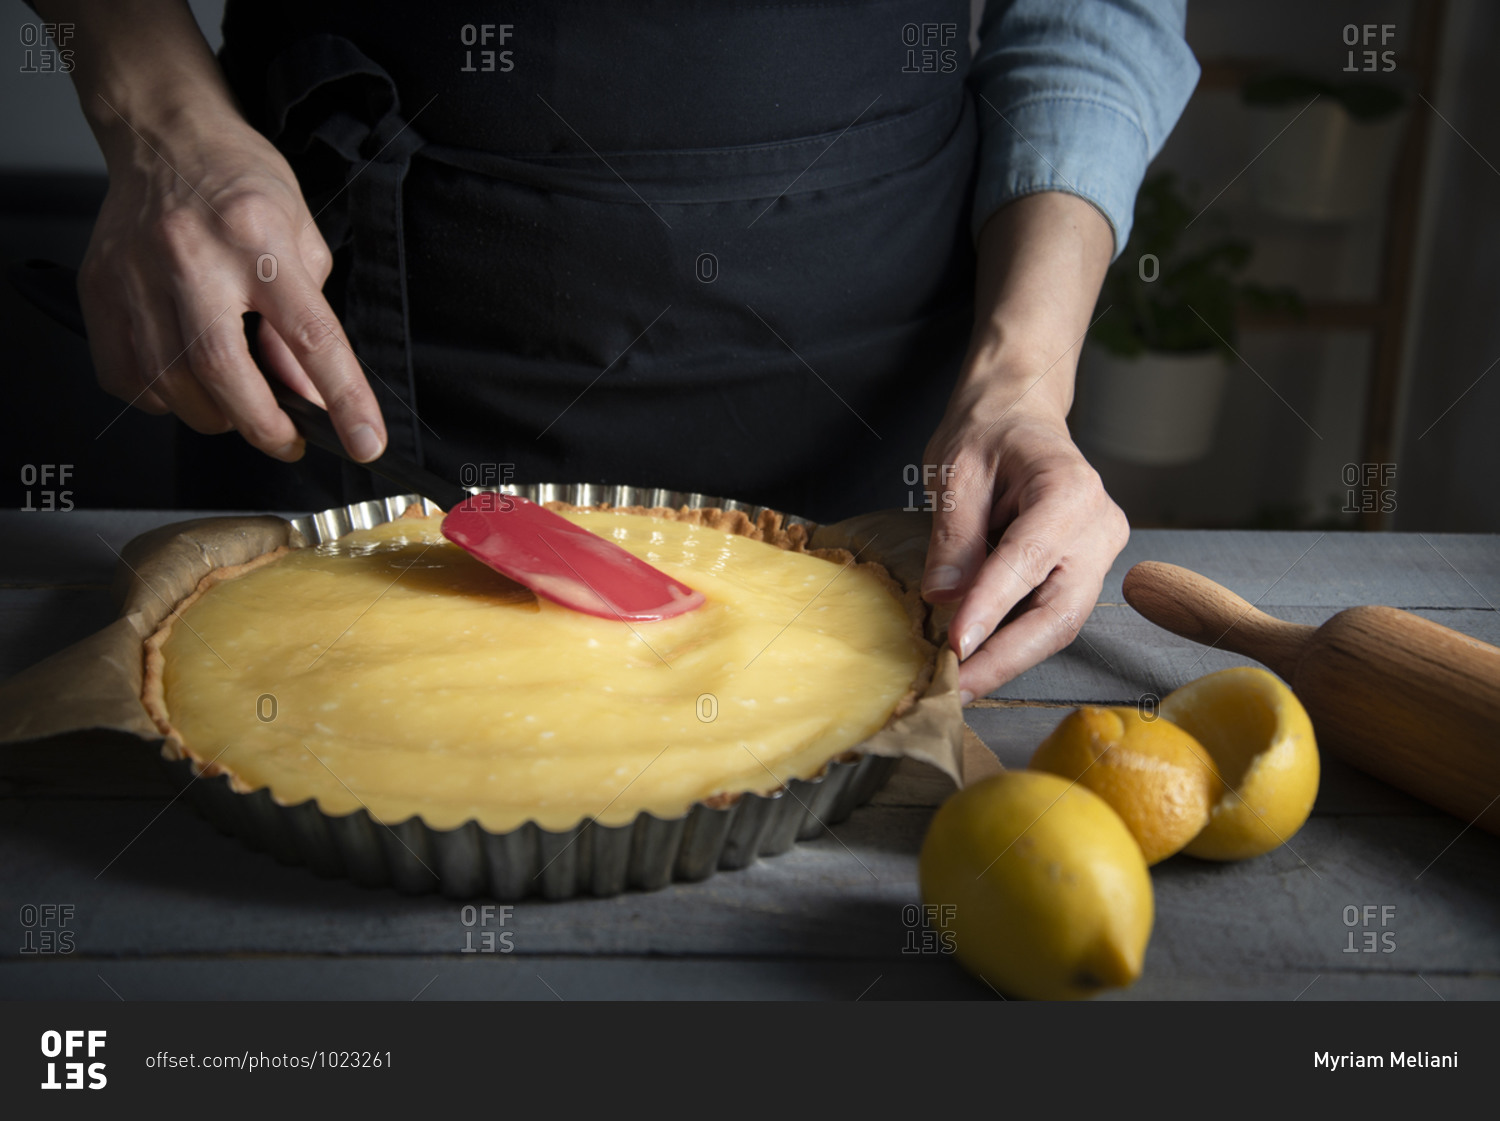 Hands smoothing out a lemon curd on a baked short crust pastry crust